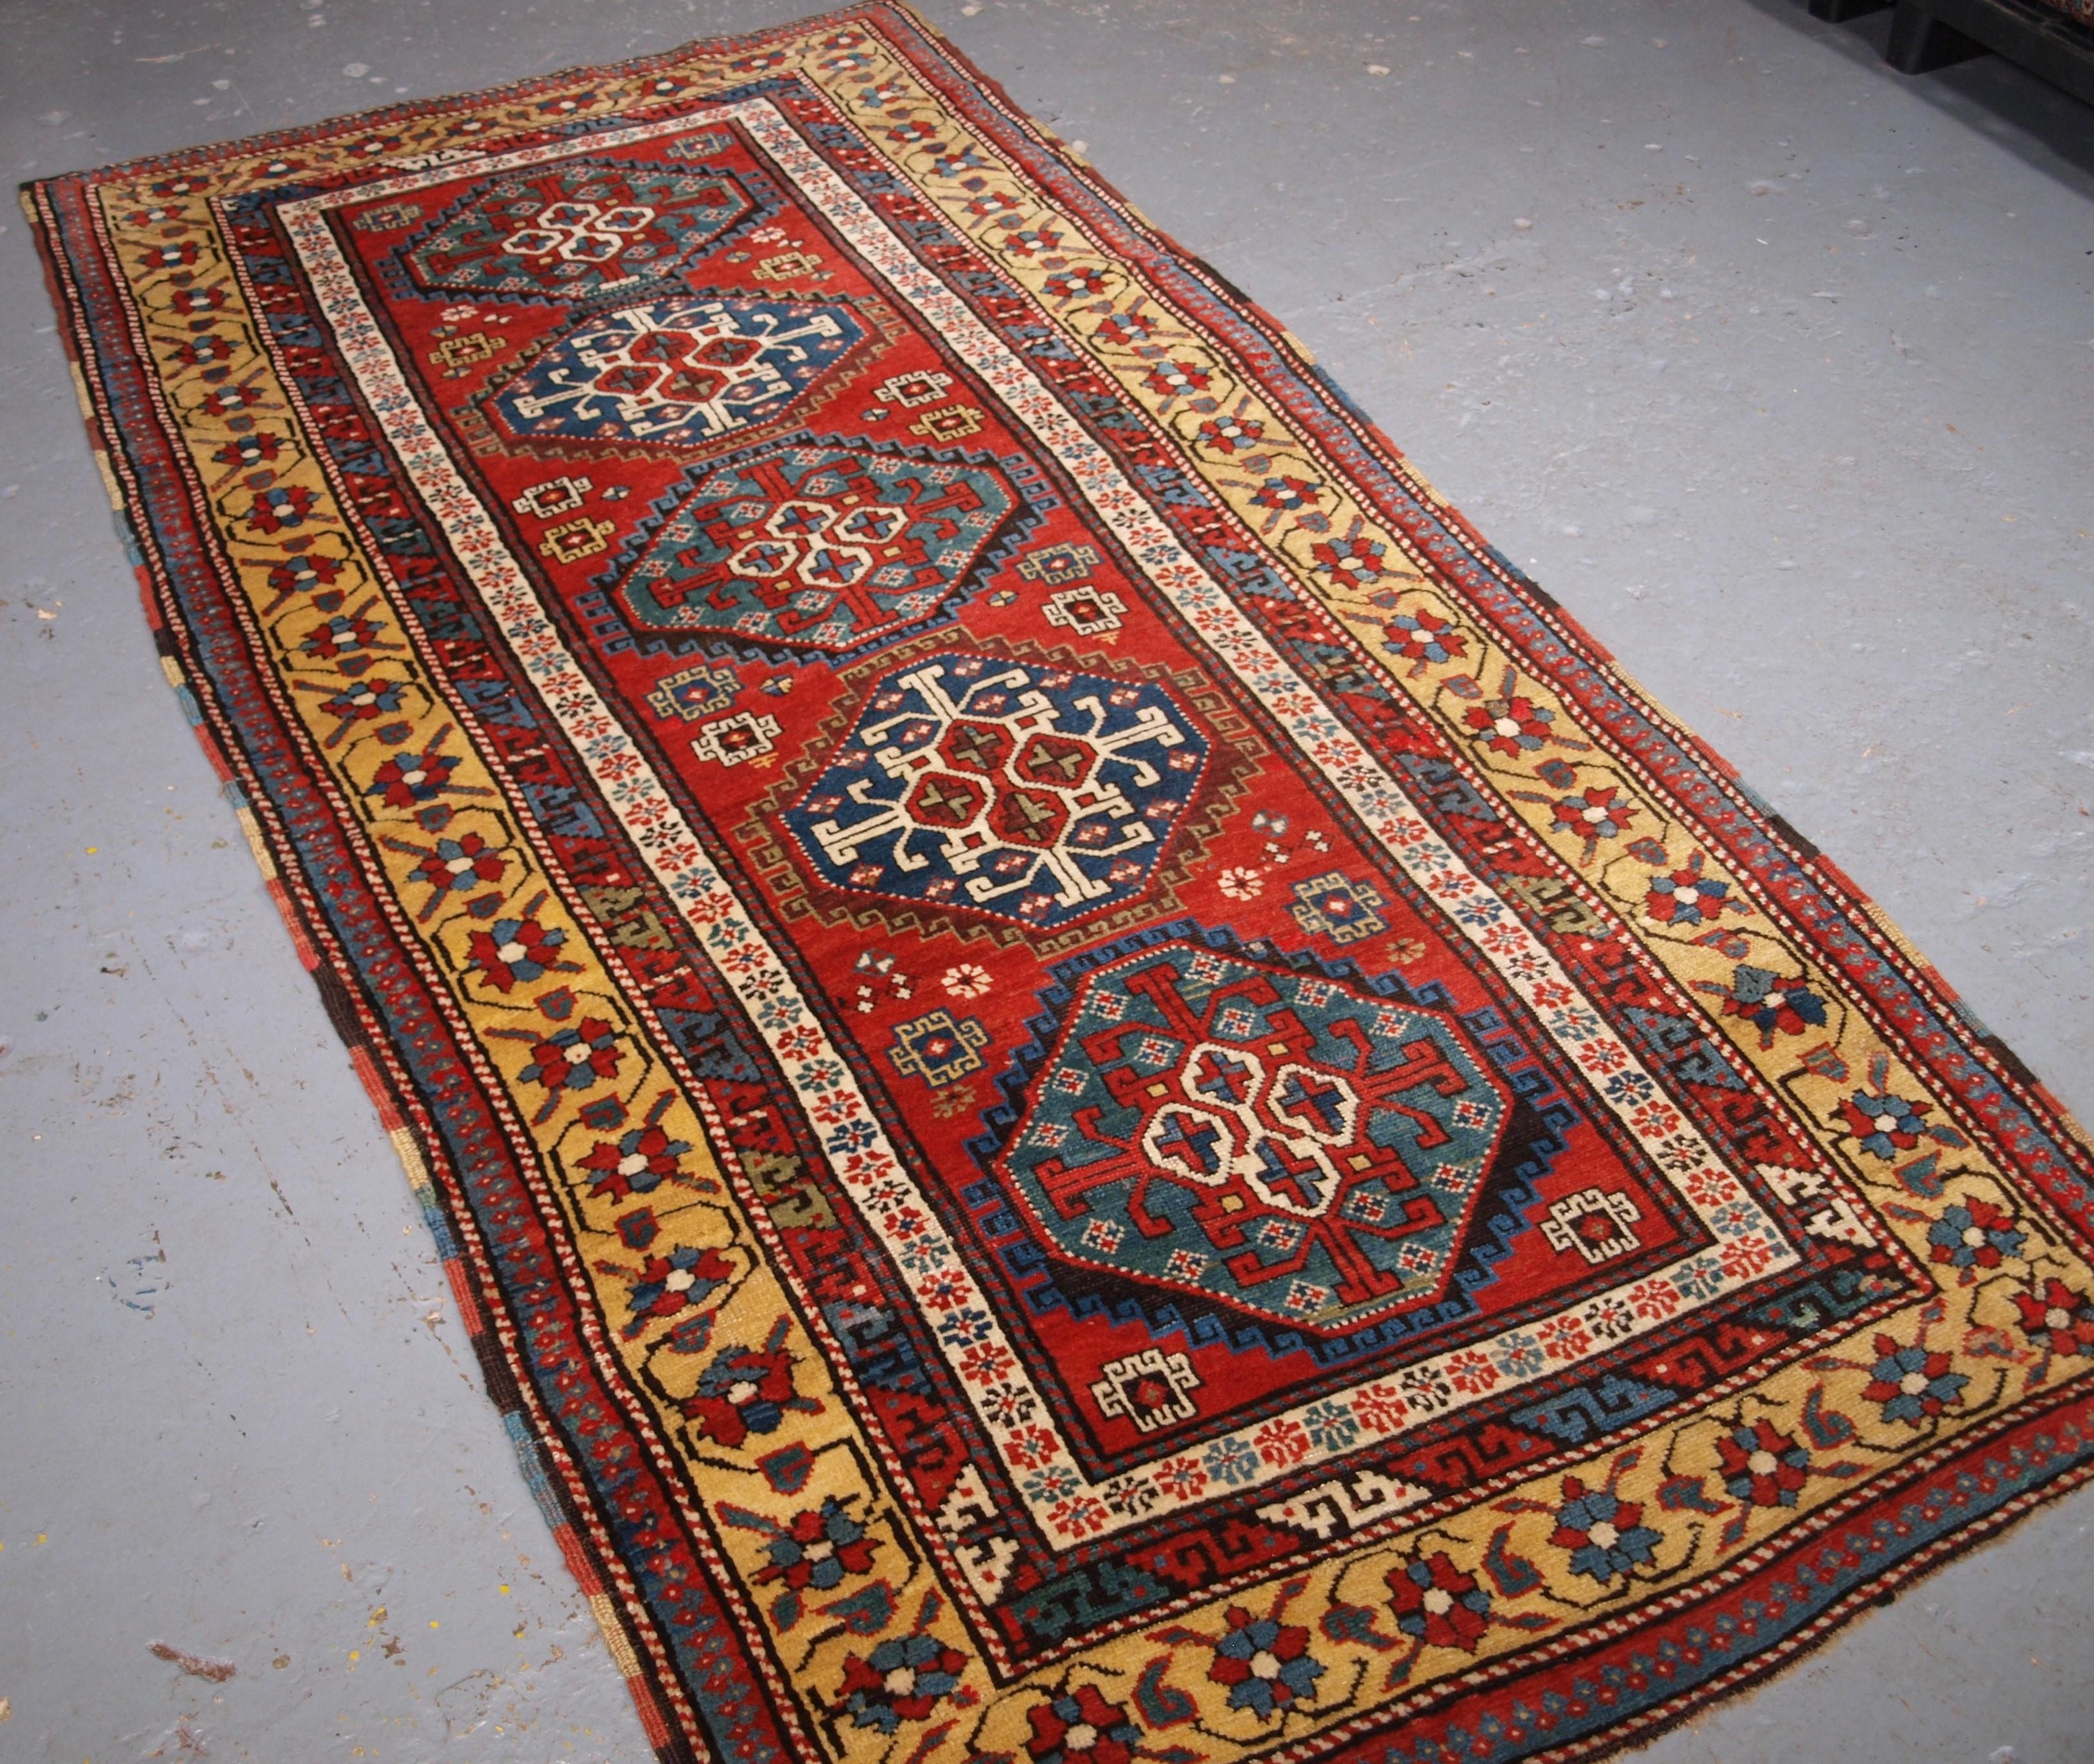 An antique South Caucasian Karabagh region long rug with a vertical row of five octagons on a clear red ground. This is a truly outstanding example of Caucasian weaving. The wool quality is excellent, very soft to the touch and the dyes are first